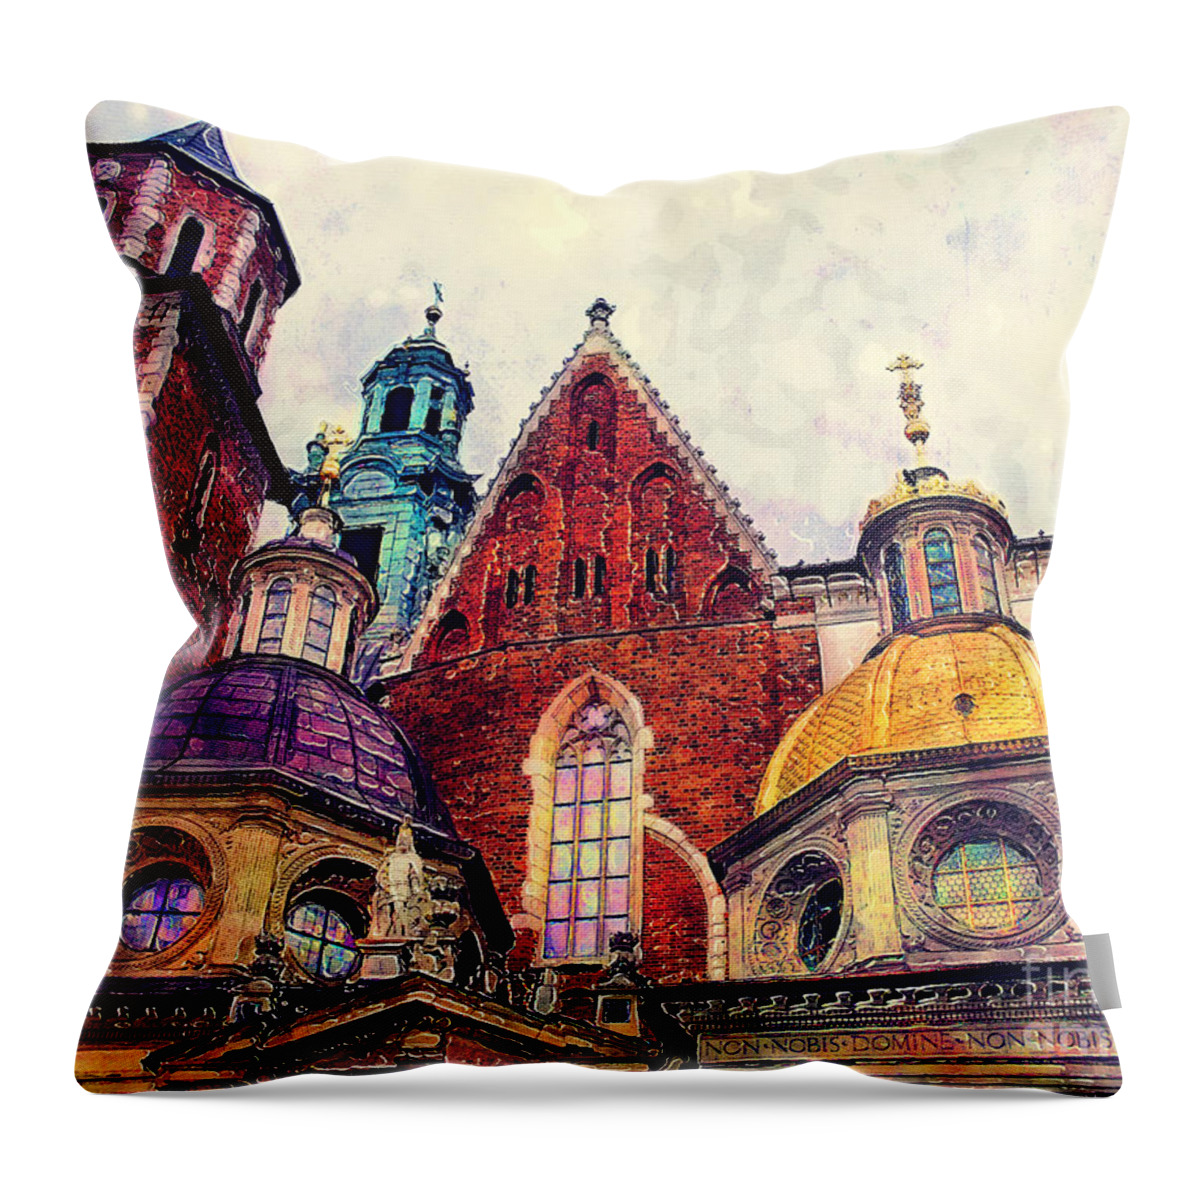 Cracow Throw Pillow featuring the painting Cracow Wawel watercolor by Justyna Jaszke JBJart